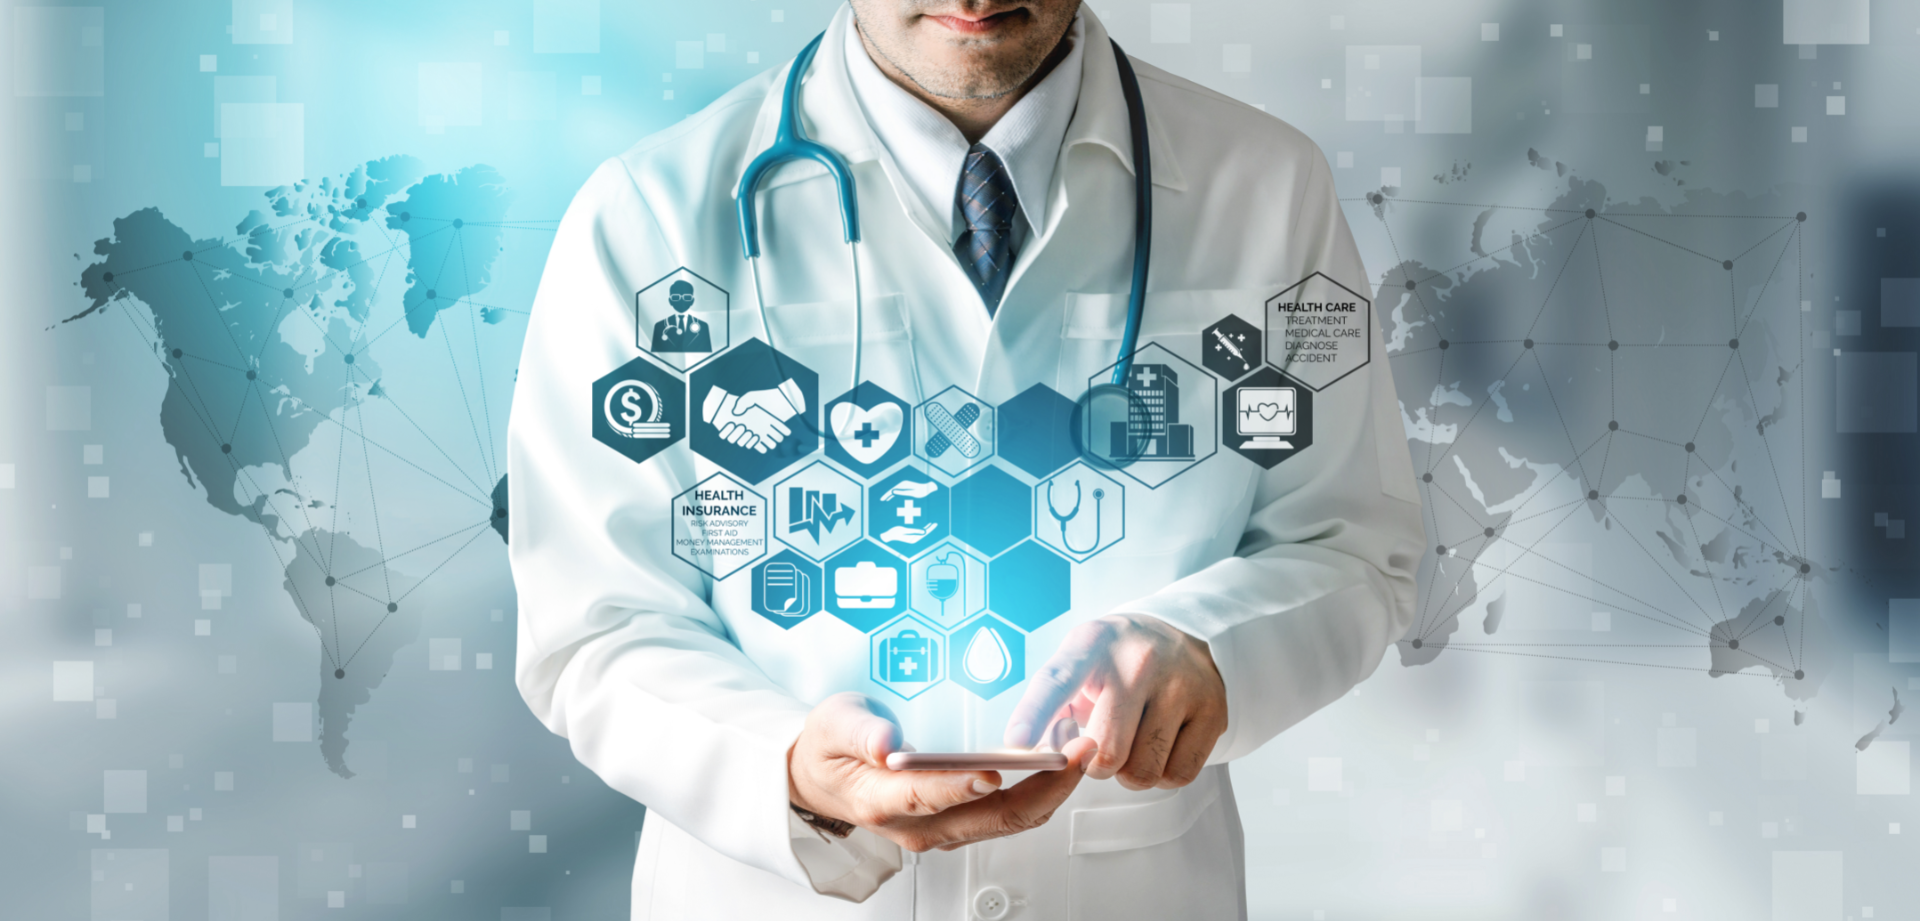 Cyberattacks in Healthcare: New Report Highlights Security Concerns of IoT Technology